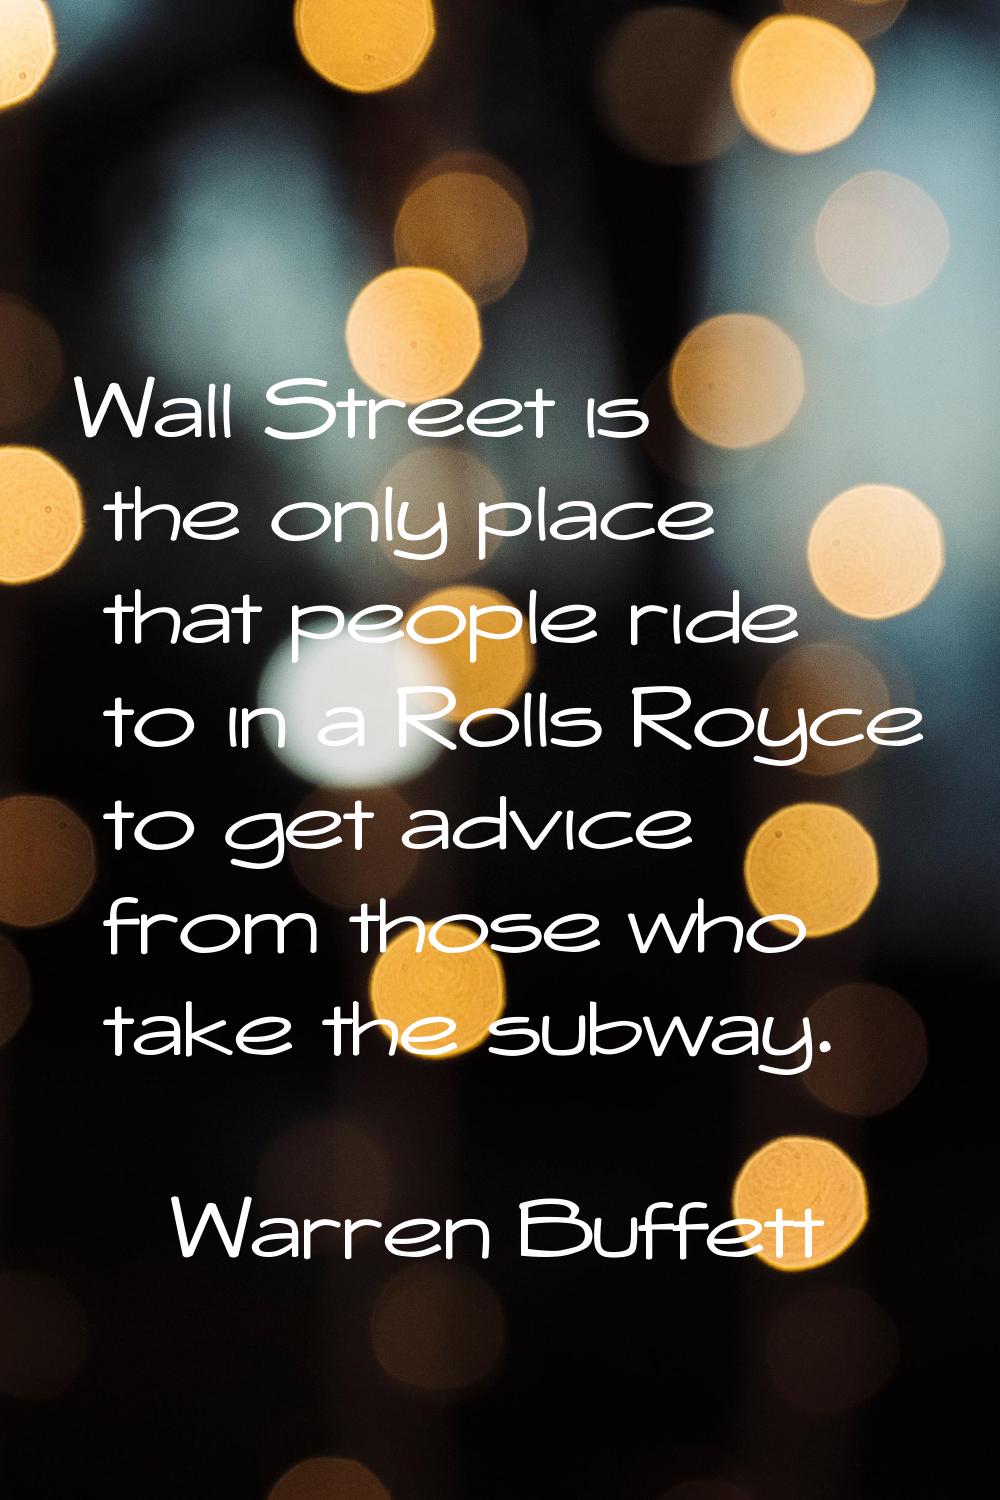 Wall Street is the only place that people ride to in a Rolls Royce to get advice from those who tak